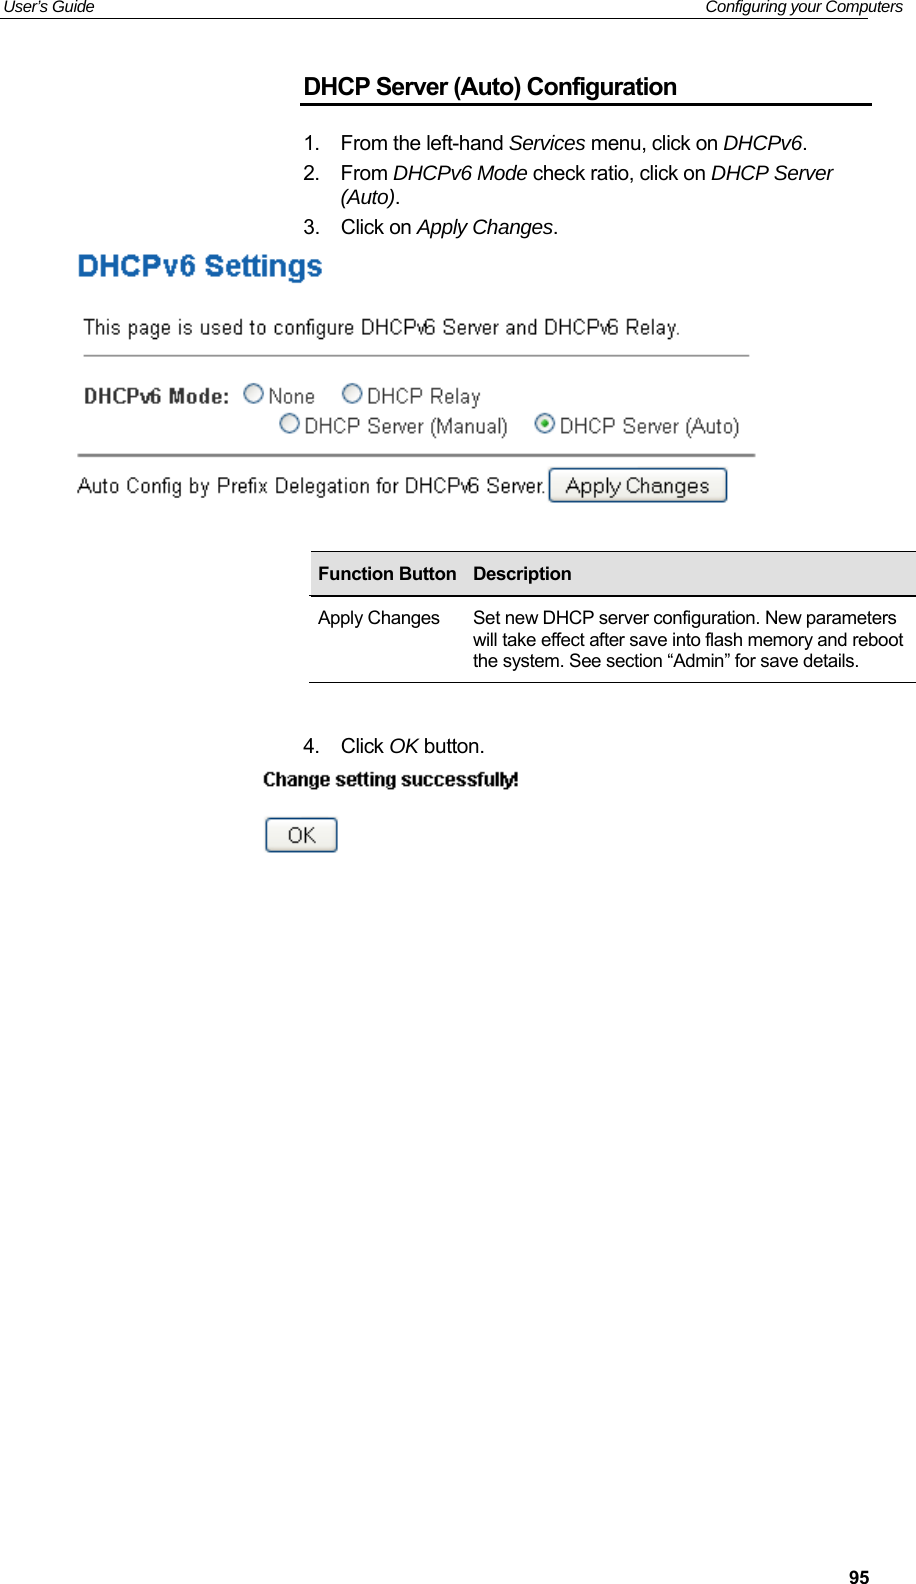 User’s Guide   Configuring your Computers  95DHCP Server (Auto) Configuration 1.  From the left-hand Services menu, click on DHCPv6. 2.  From DHCPv6 Mode check ratio, click on DHCP Server (Auto). 3.  Click on Apply Changes.        4.  Click OK button.                   Function Button Description Apply Changes  Set new DHCP server configuration. New parameters will take effect after save into flash memory and reboot the system. See section “Admin” for save details. 